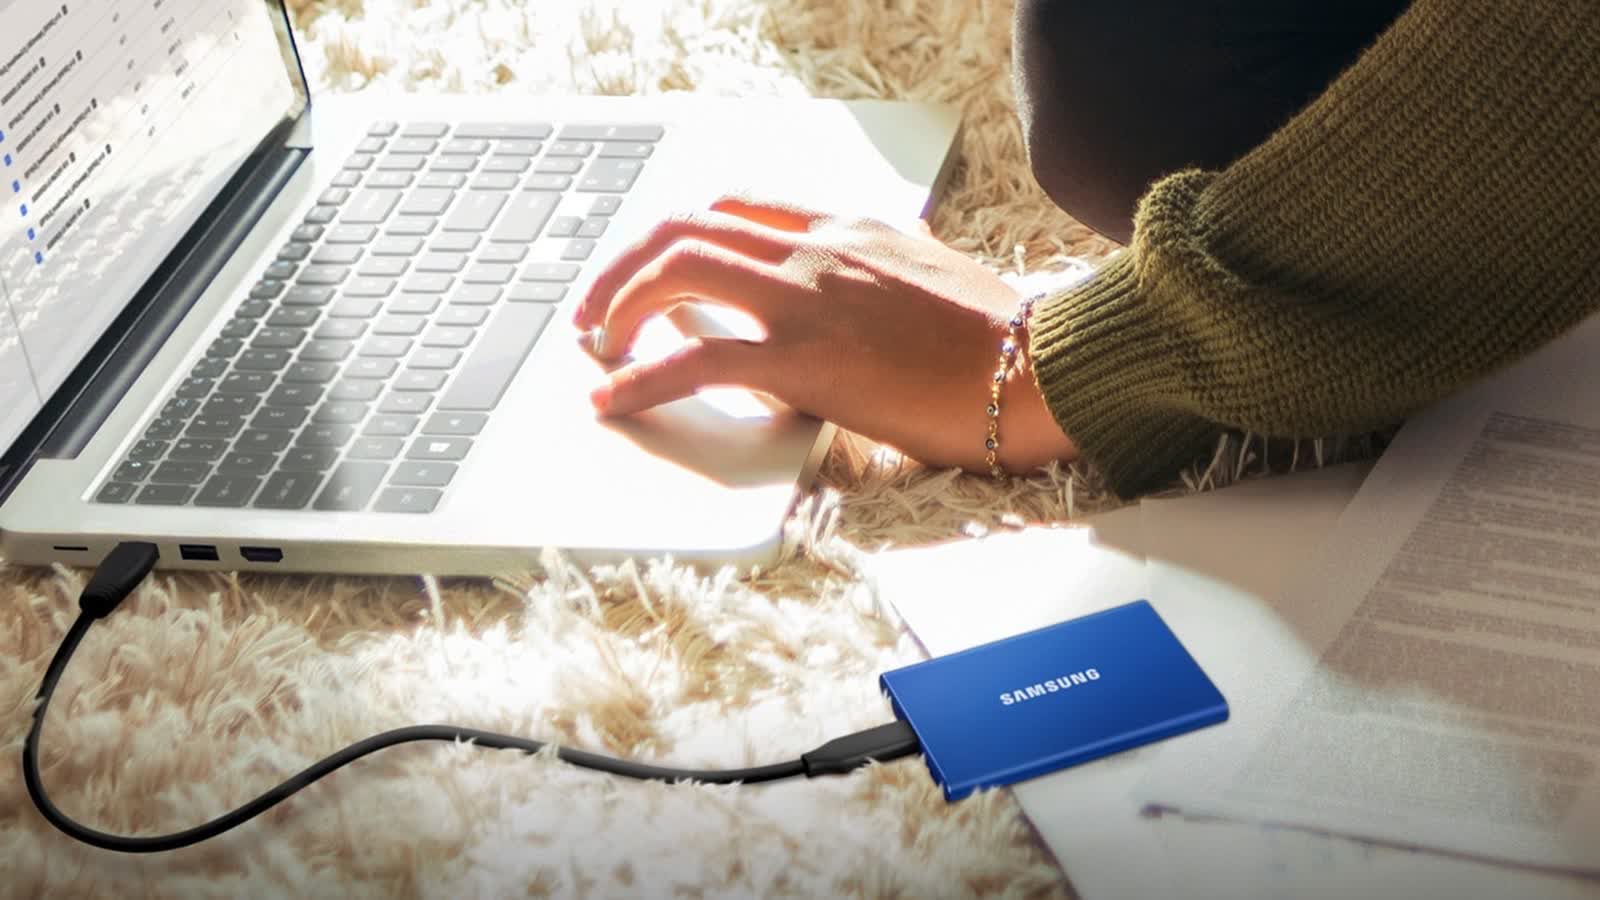 Unannounced Samsung T9 portable SSD appears in retail listings